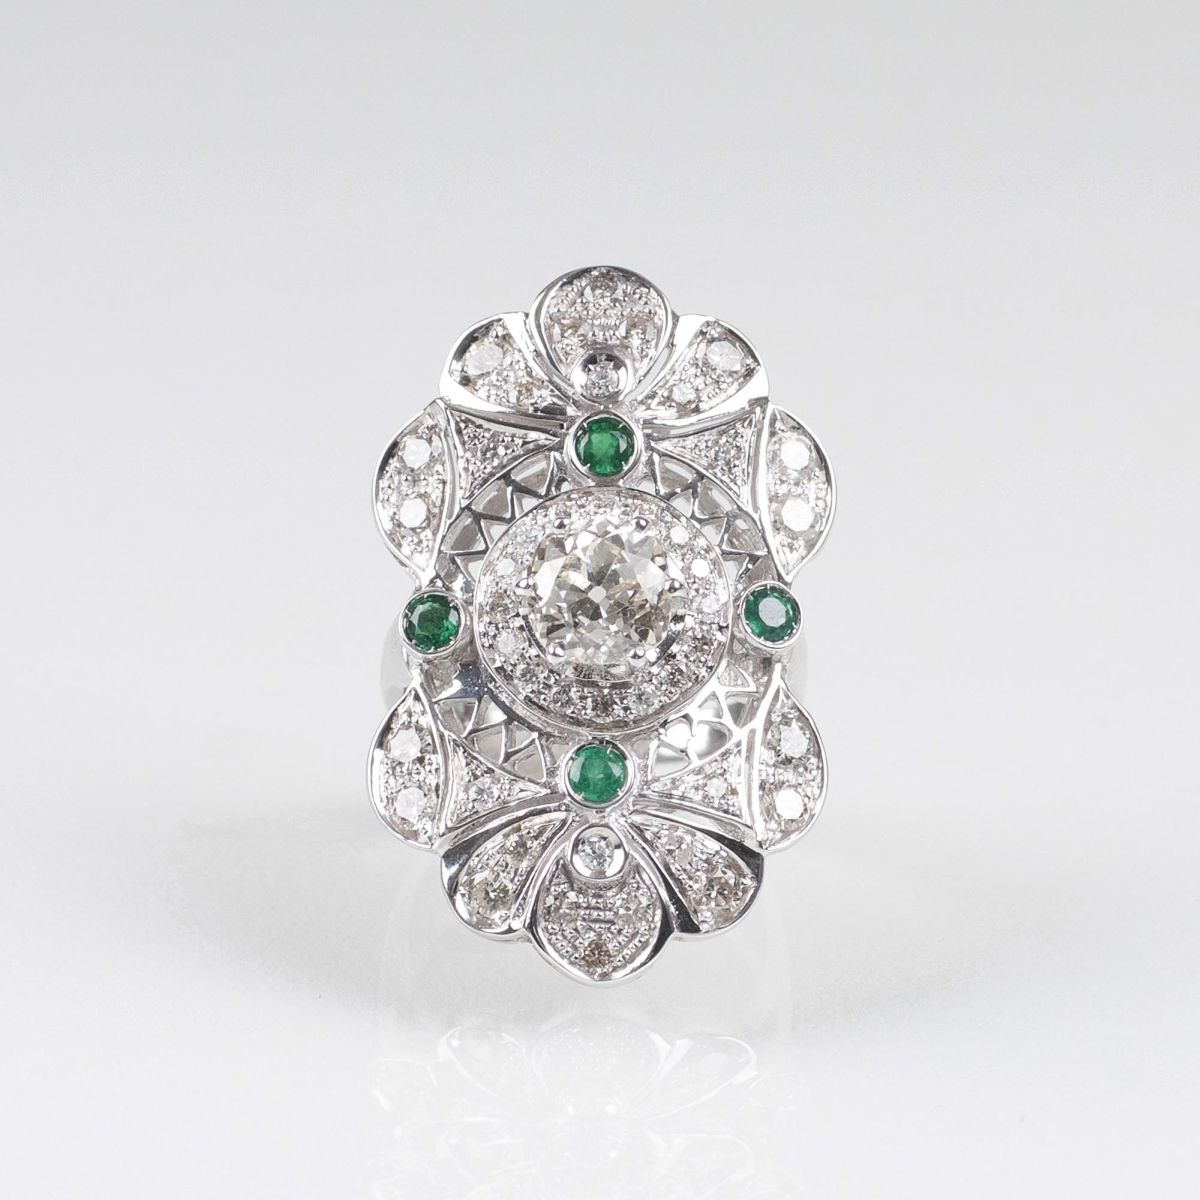 A large Emerald Diamond Ring with Old European Cut Solitaire Diamond - image 2